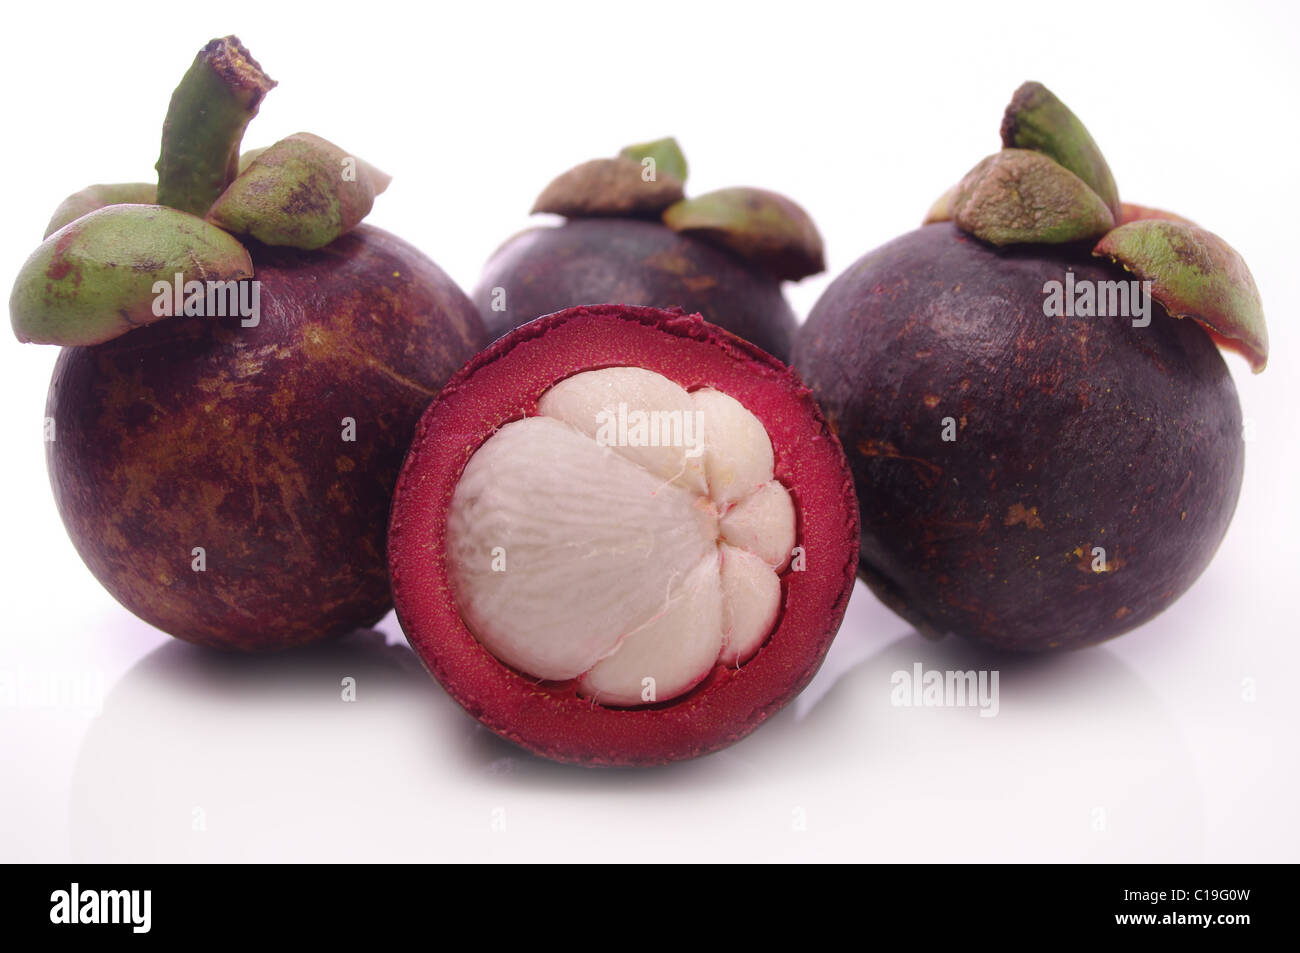 Mangosteen fruit and cross section showing the thick purple skin and white flesh of the queen of fruits. Stock Photo